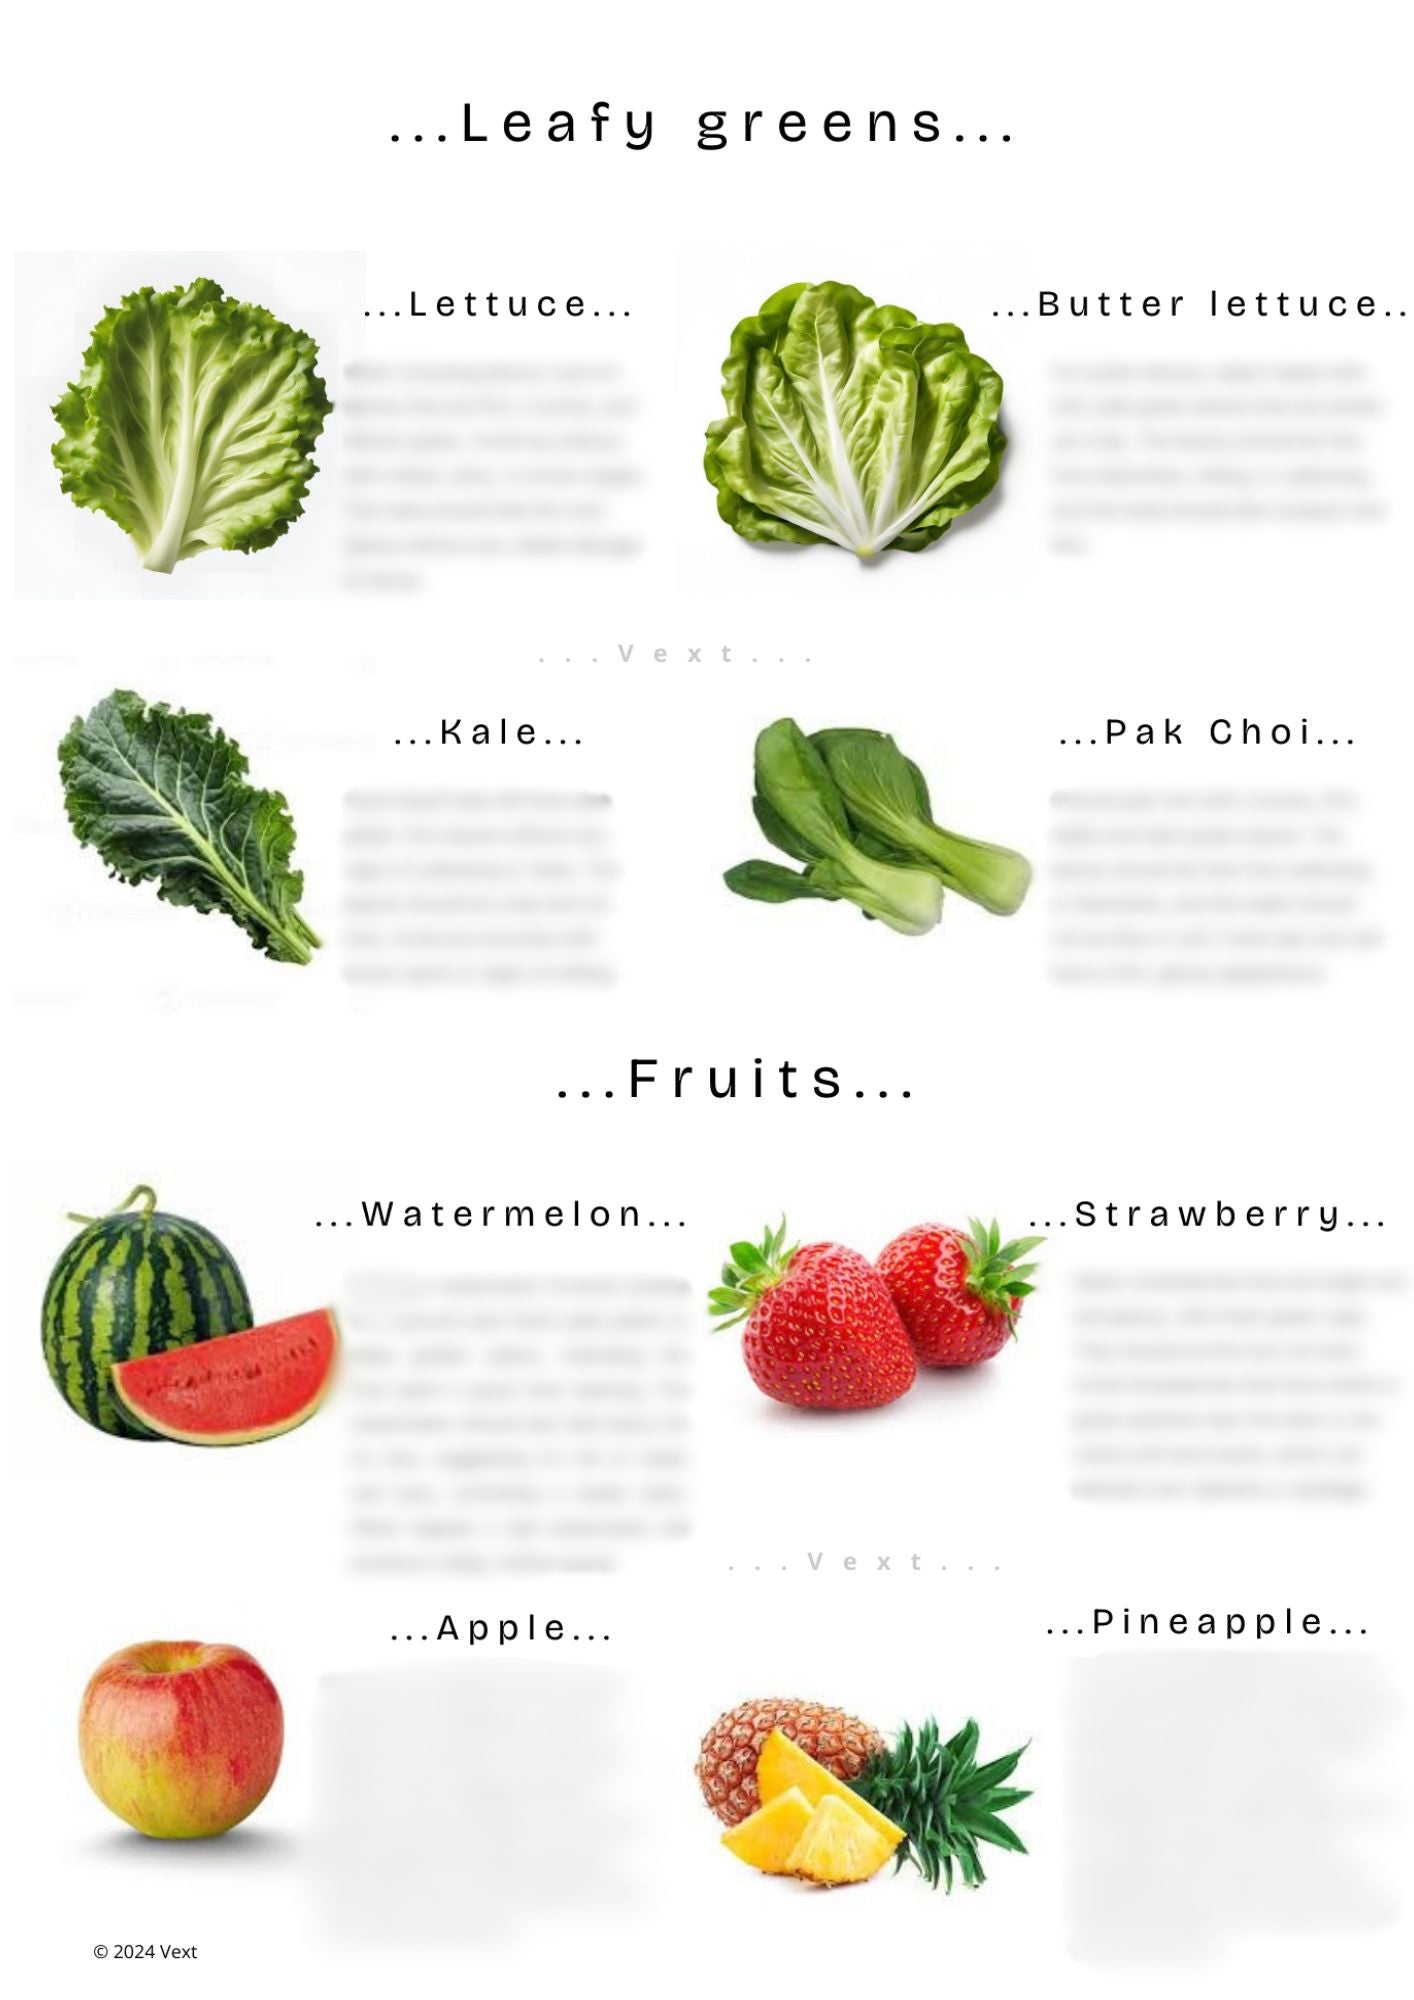 How to choose the freshest greens PDF guide